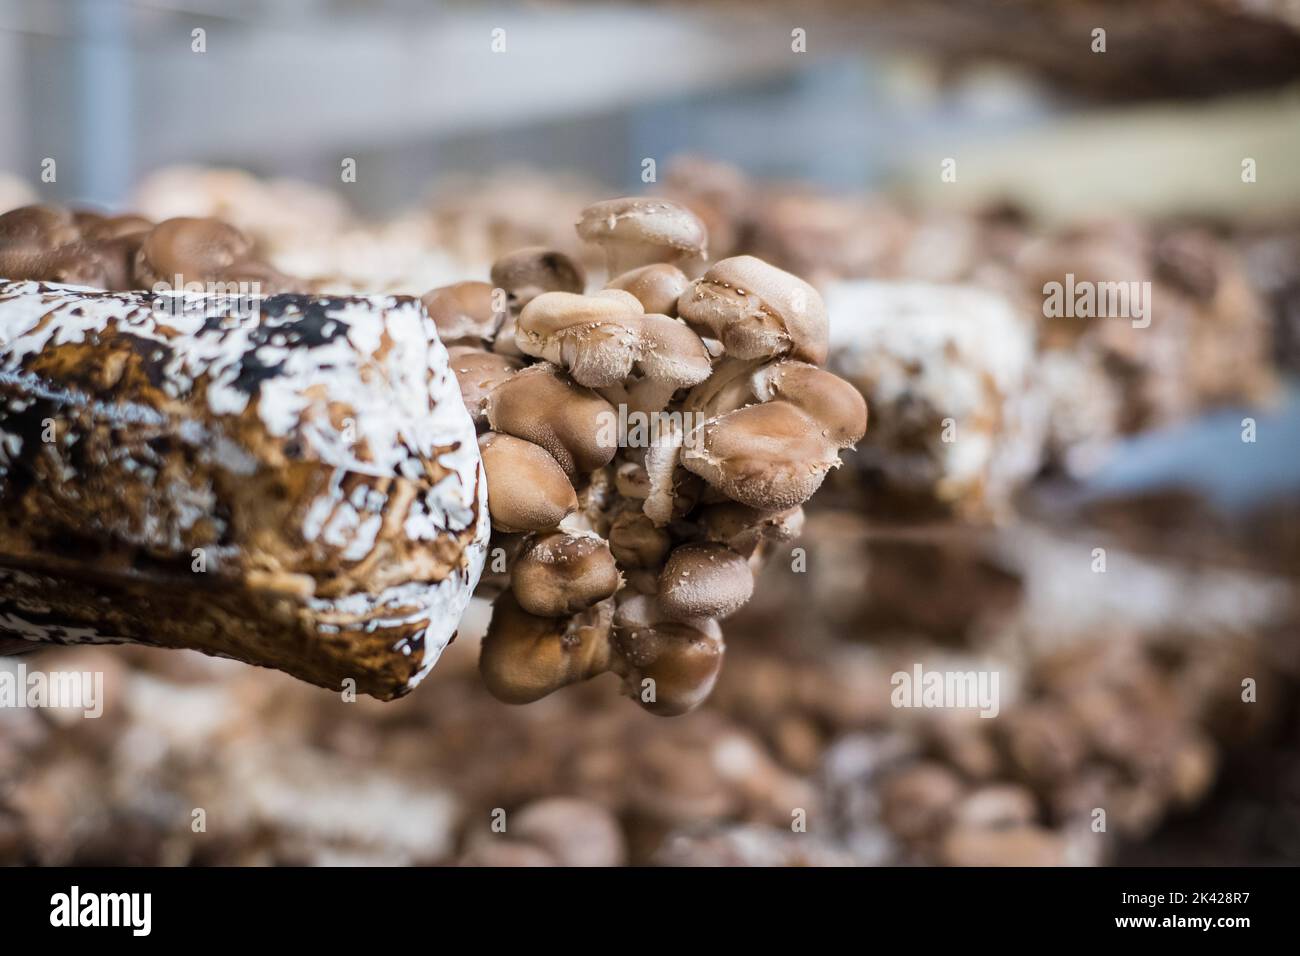 Shiitake mushrooms cultivated in vertical mushroom farm growing on substrate. Stock Photo